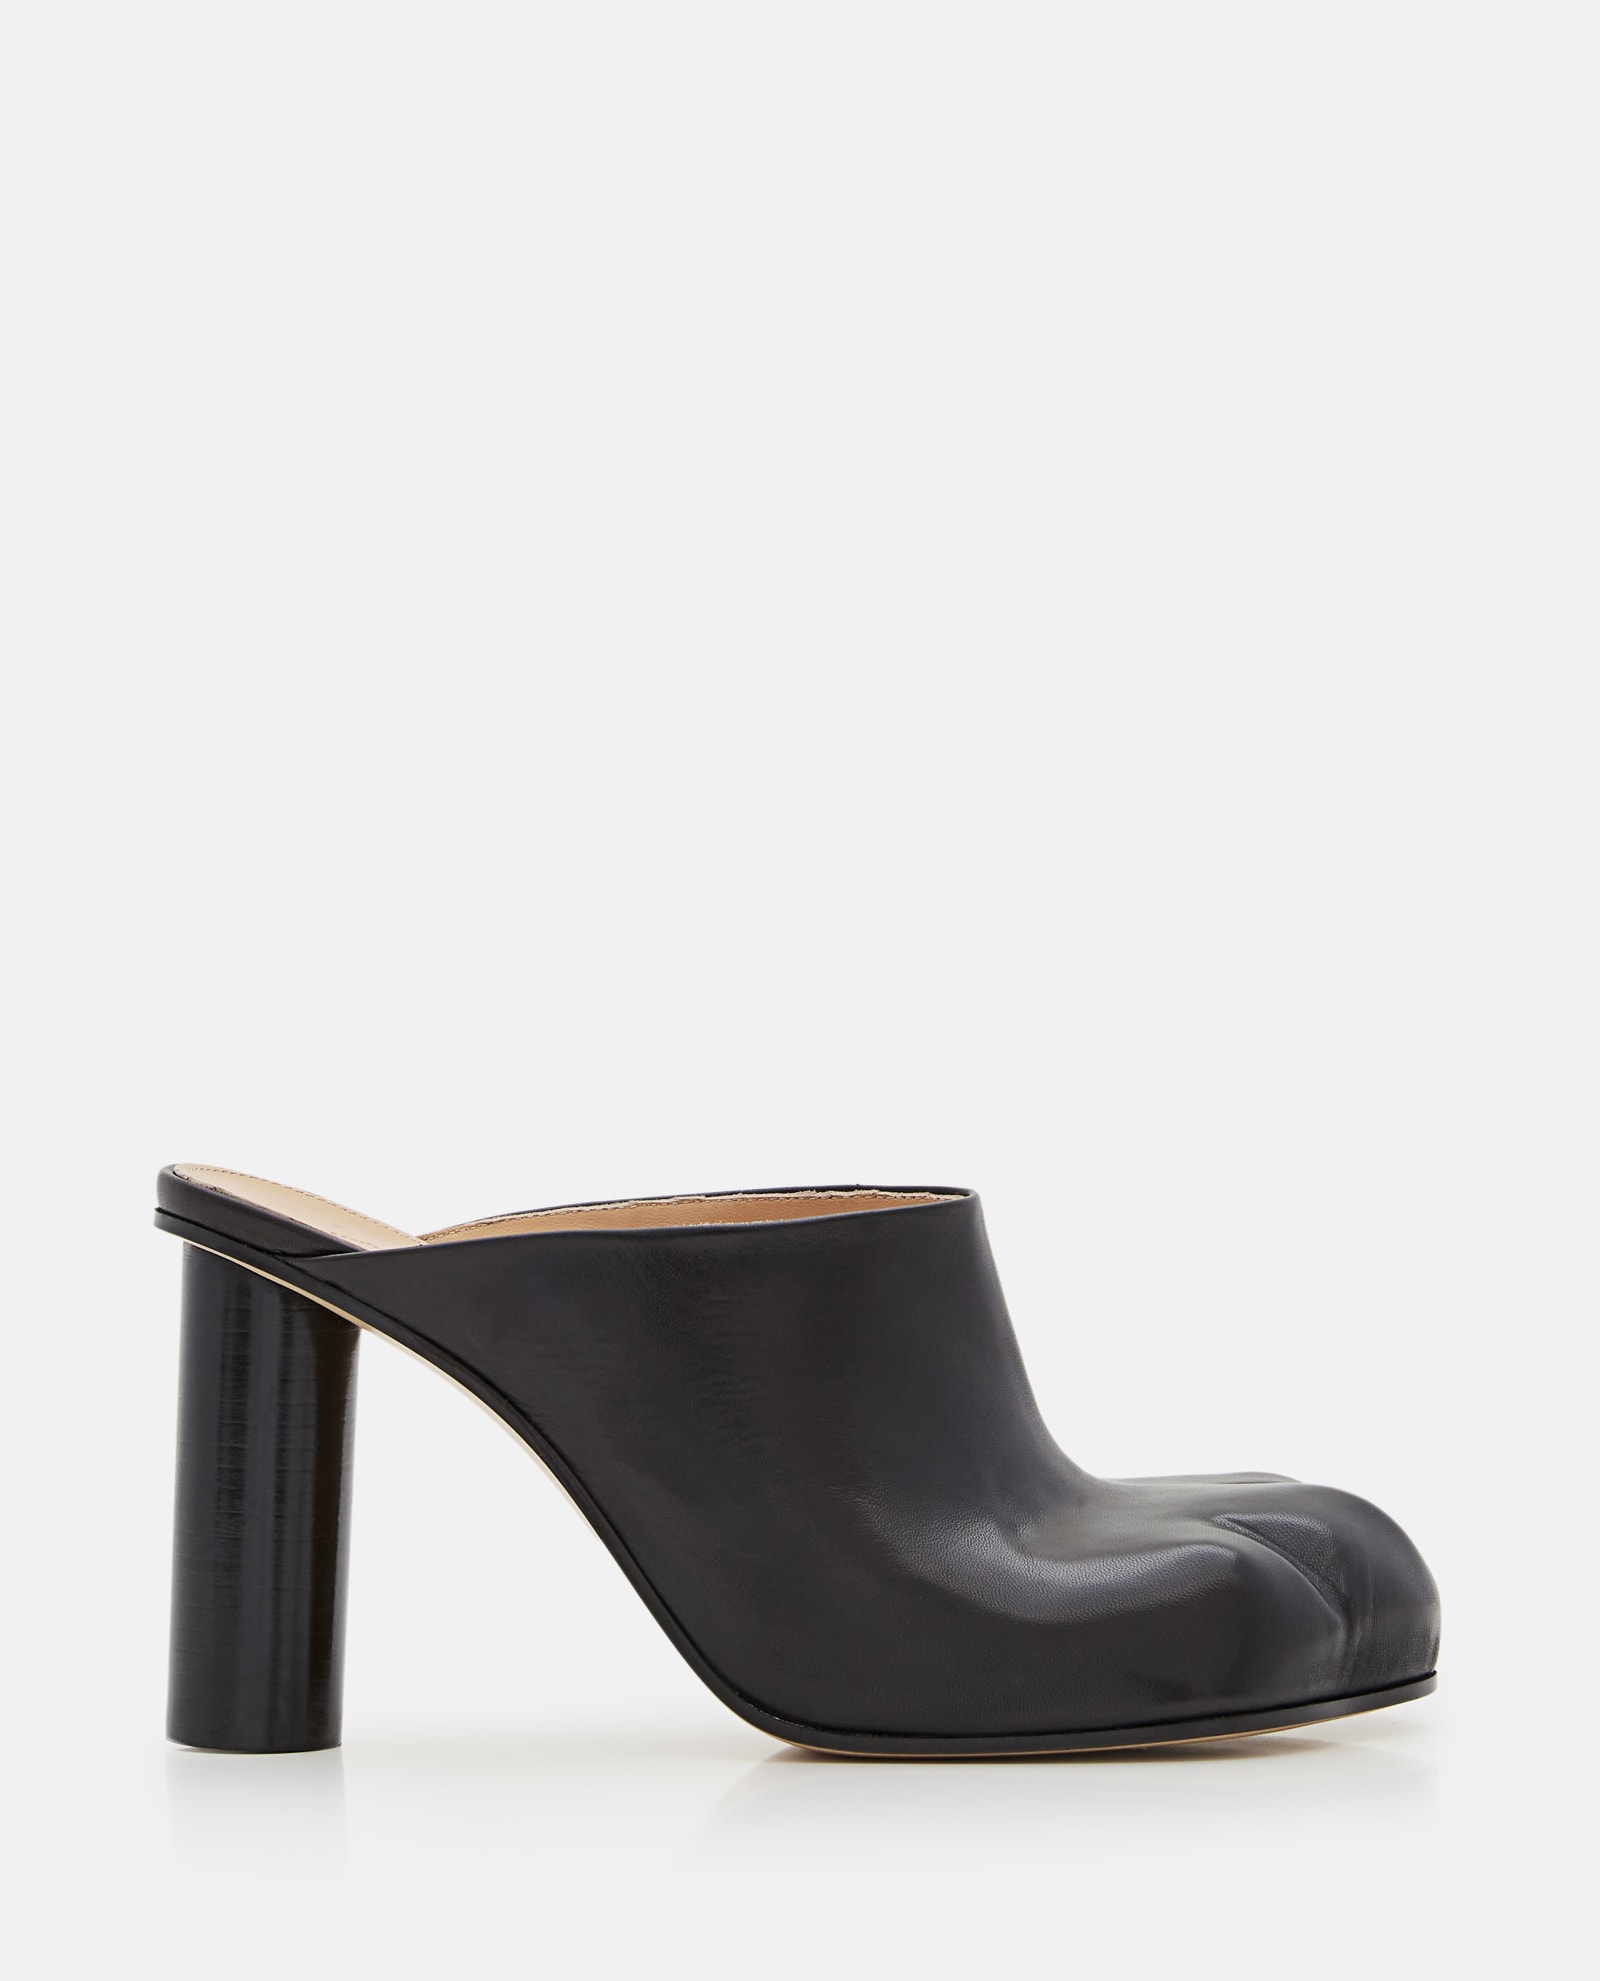 JW ANDERSON HEELED PAW LEATHER MULES